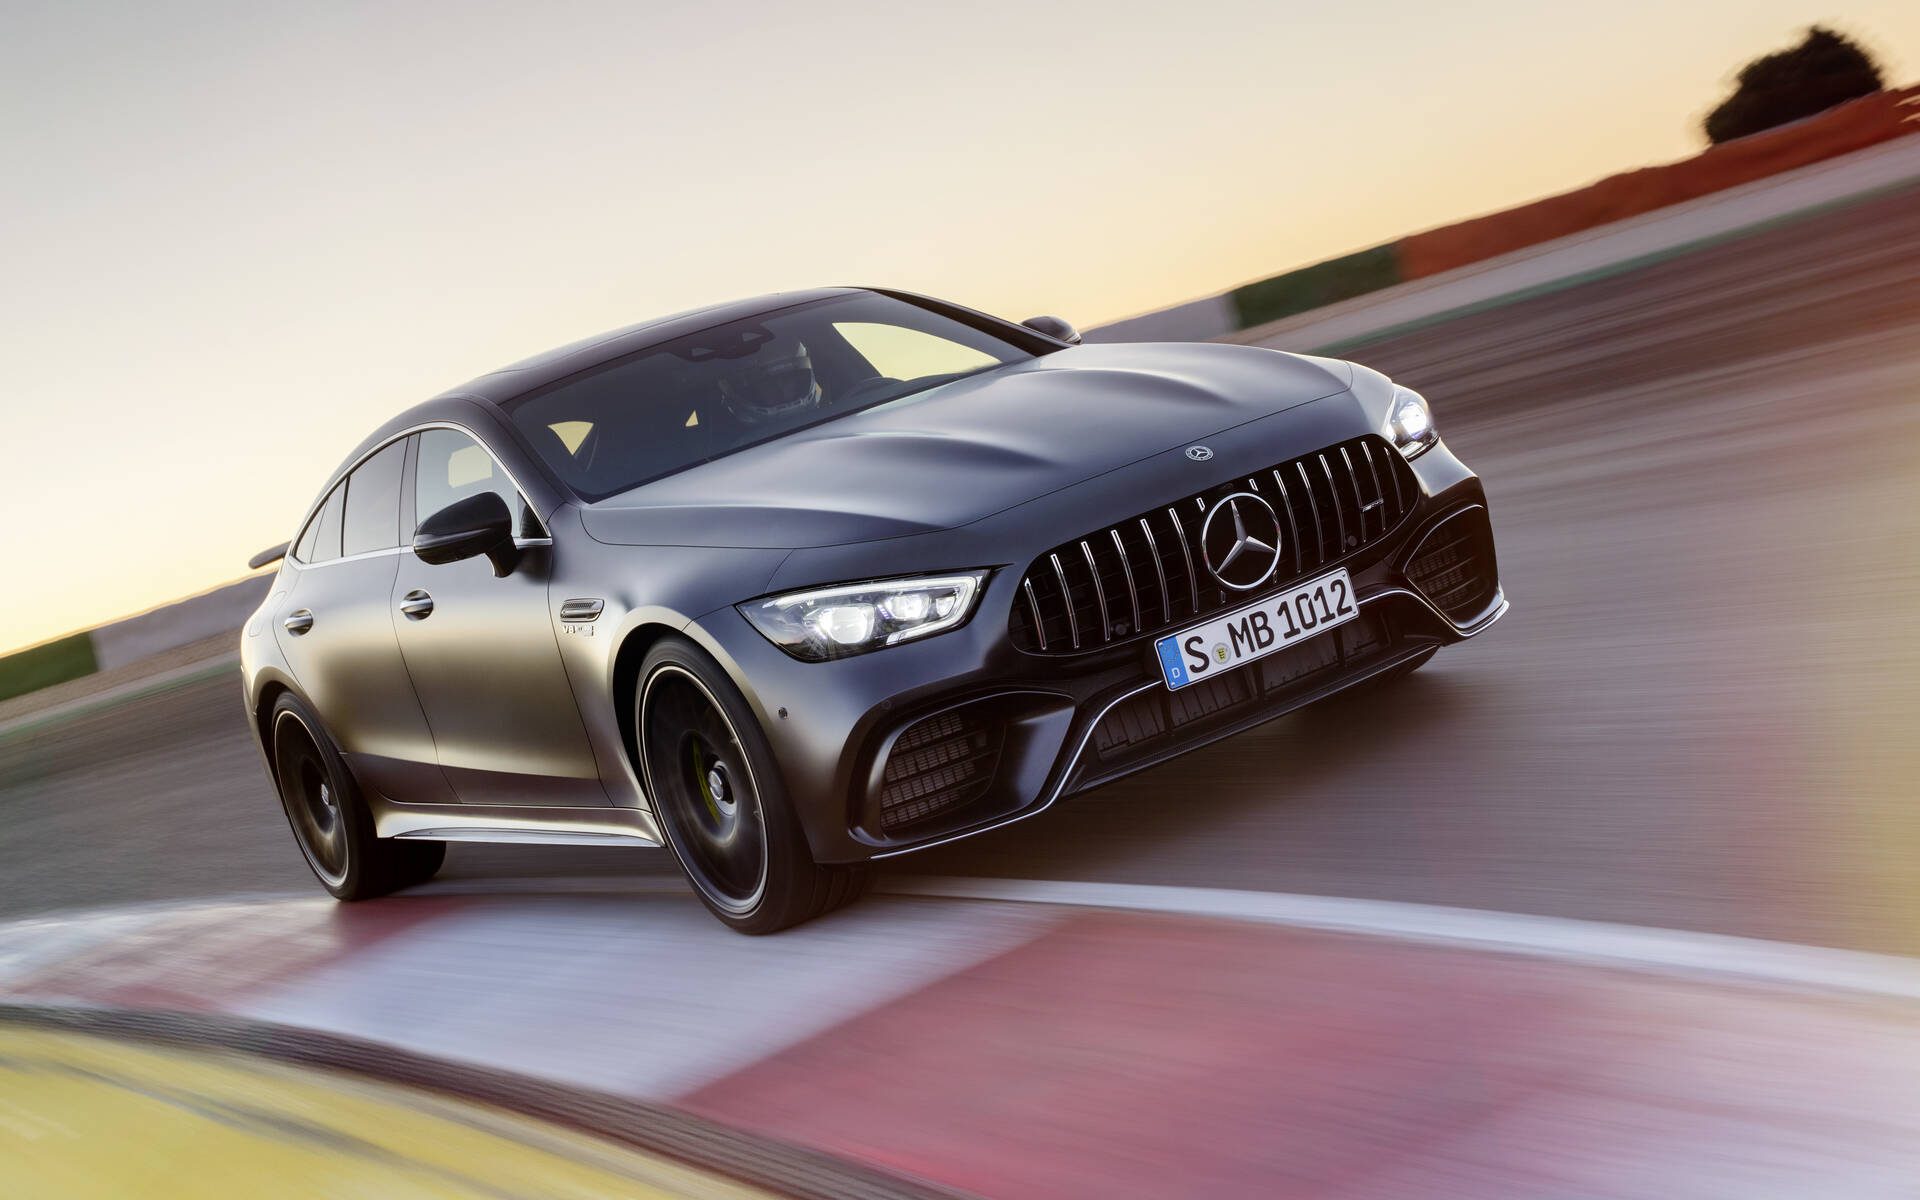 2021 Mercedes Benz Amg Gt 4 Door Coupe 63 S 4matic Specifications The Car Guide